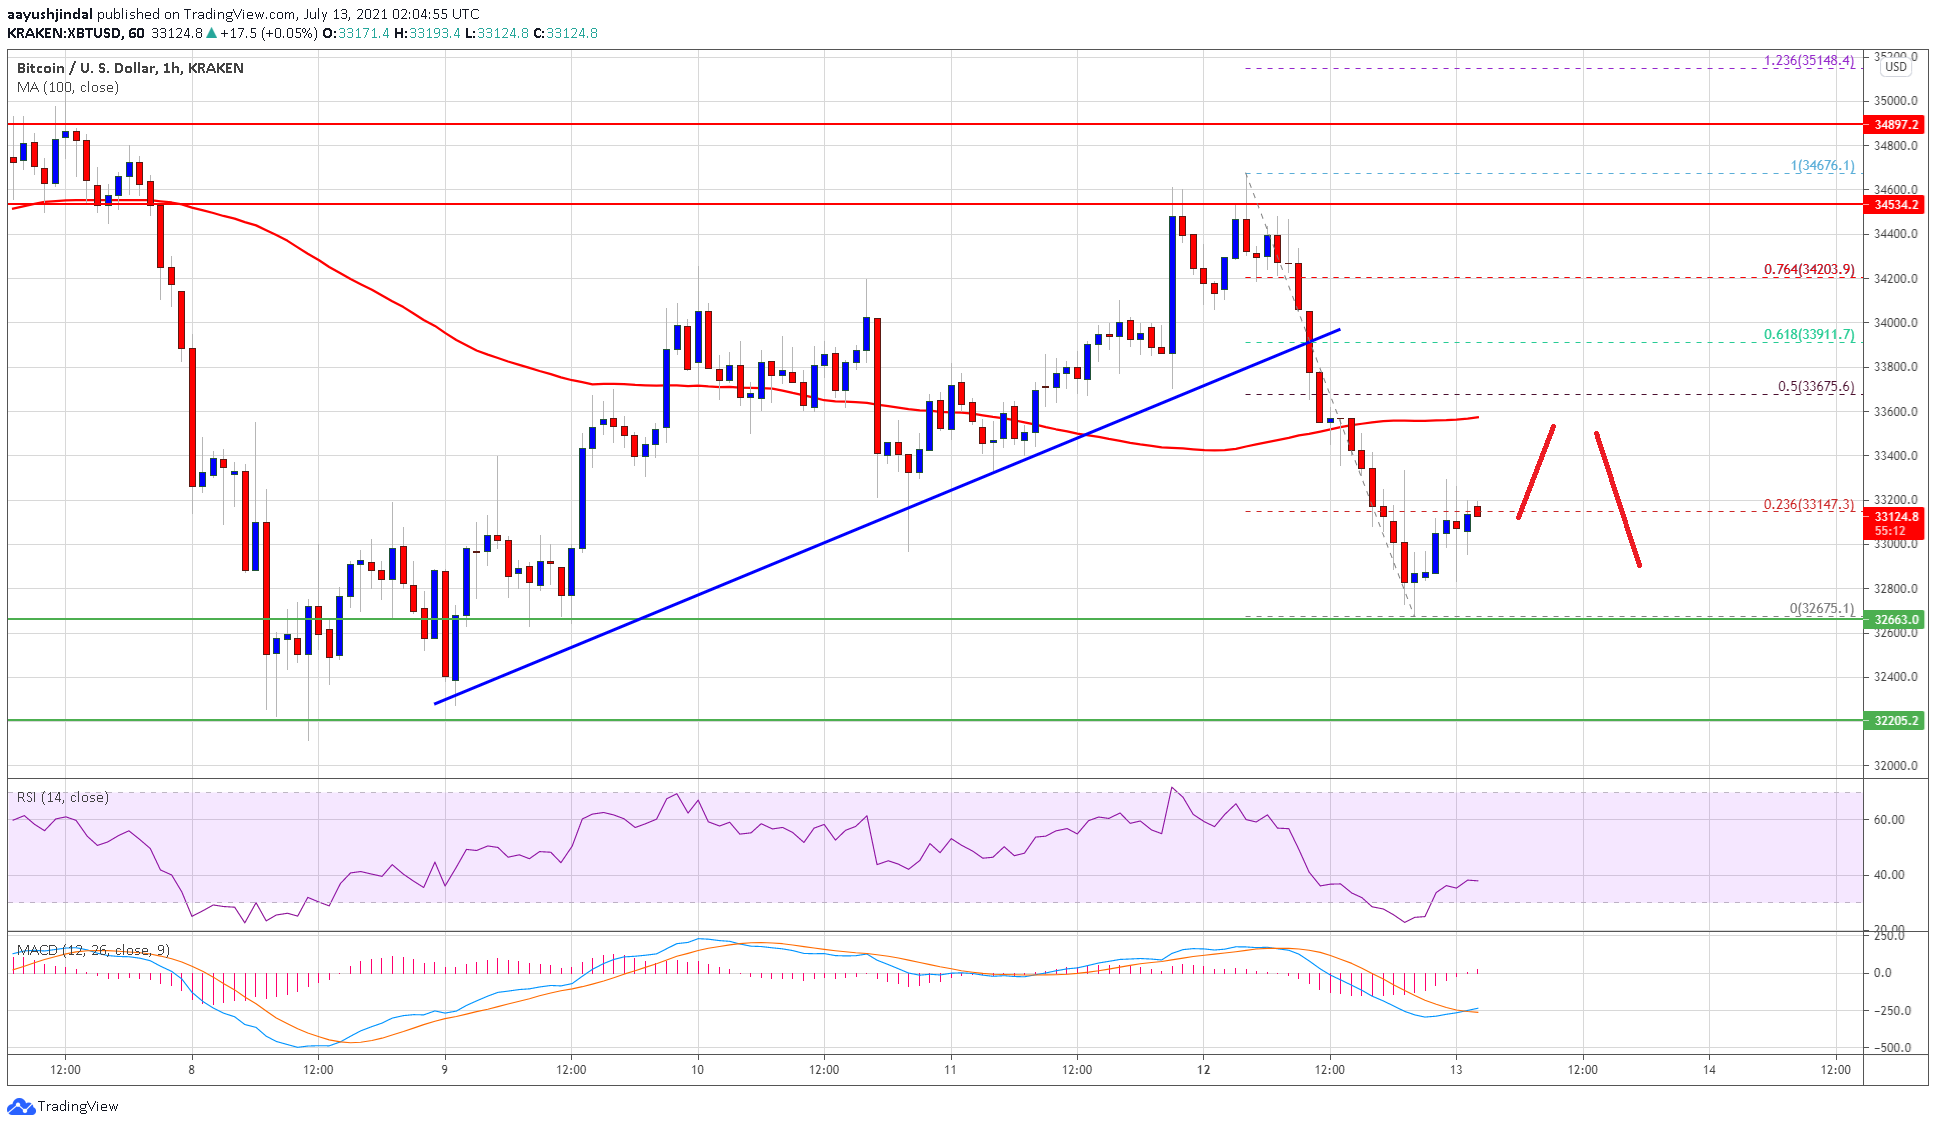 TA: Bitcoin Tops and Fails Again, What Could Trigger Larger Decline